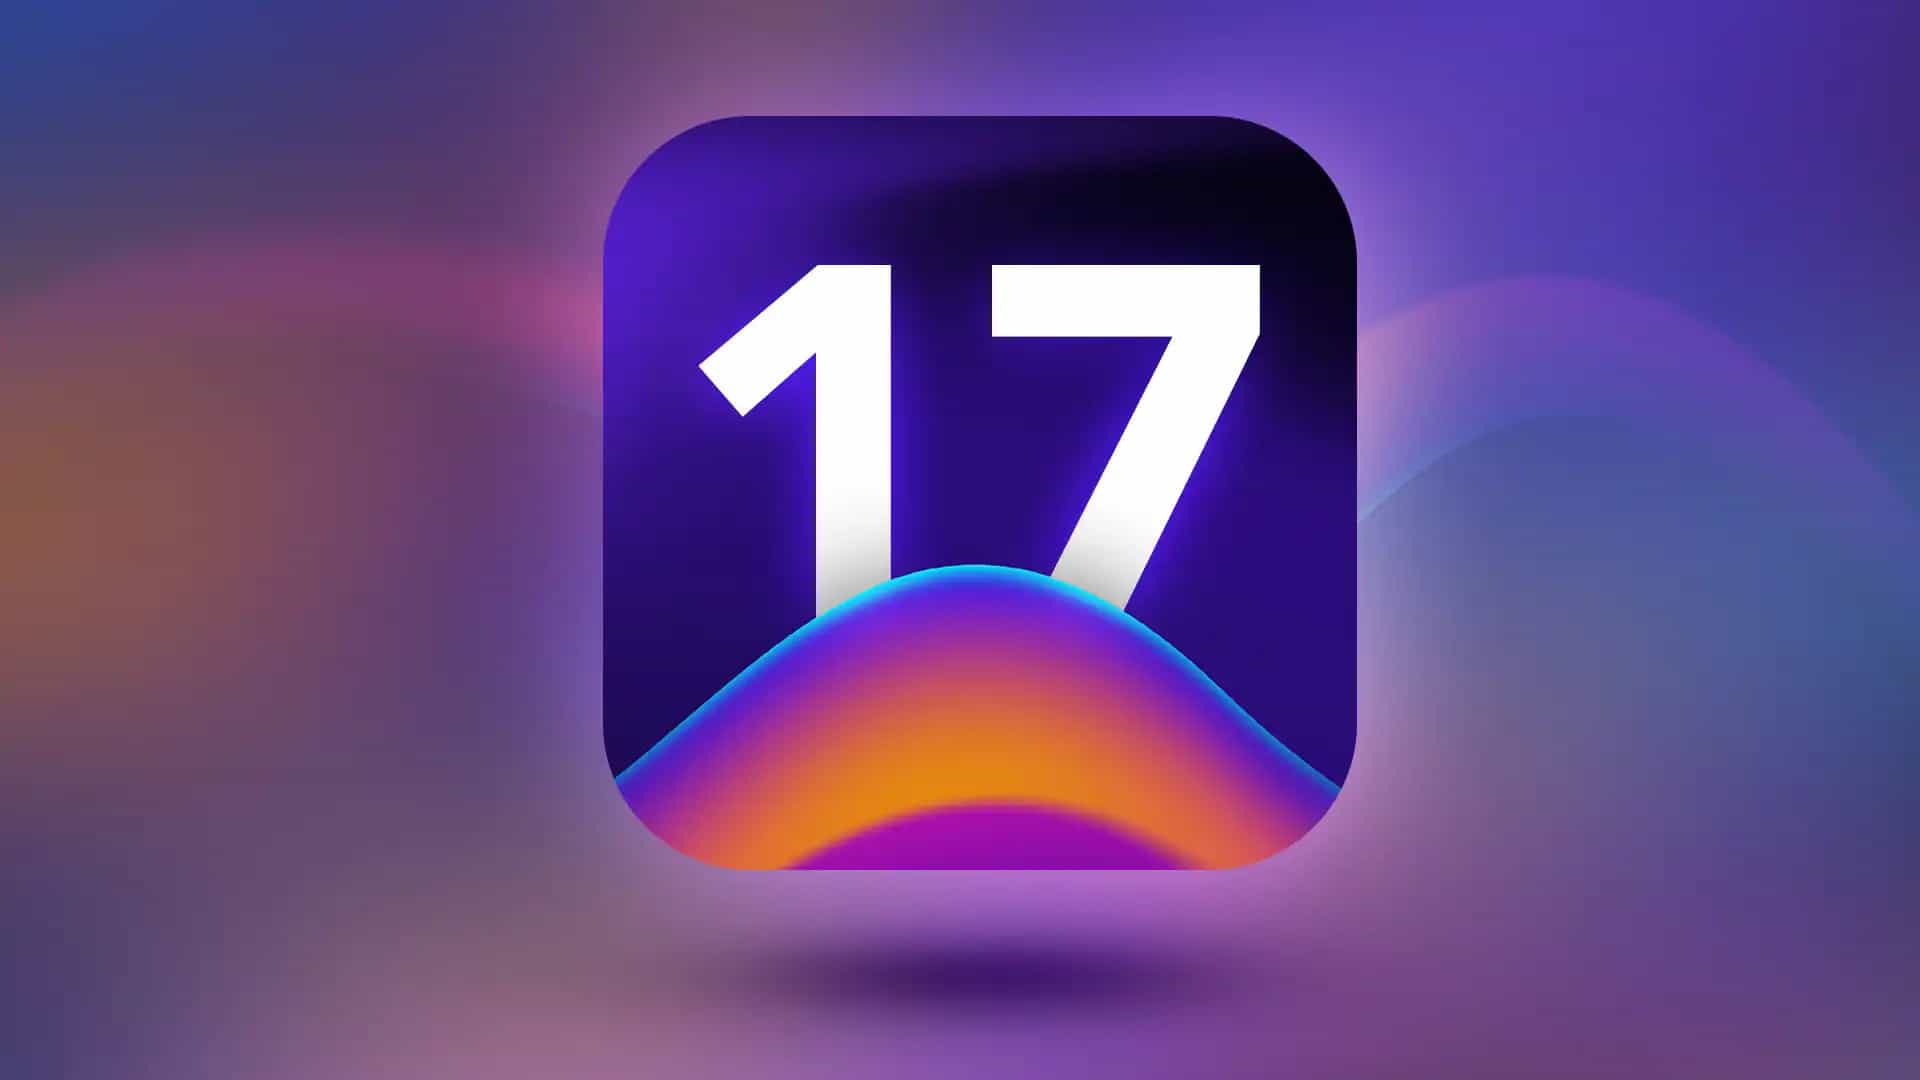 iOS 17: Features, Compatible Devices, Release Date, and More